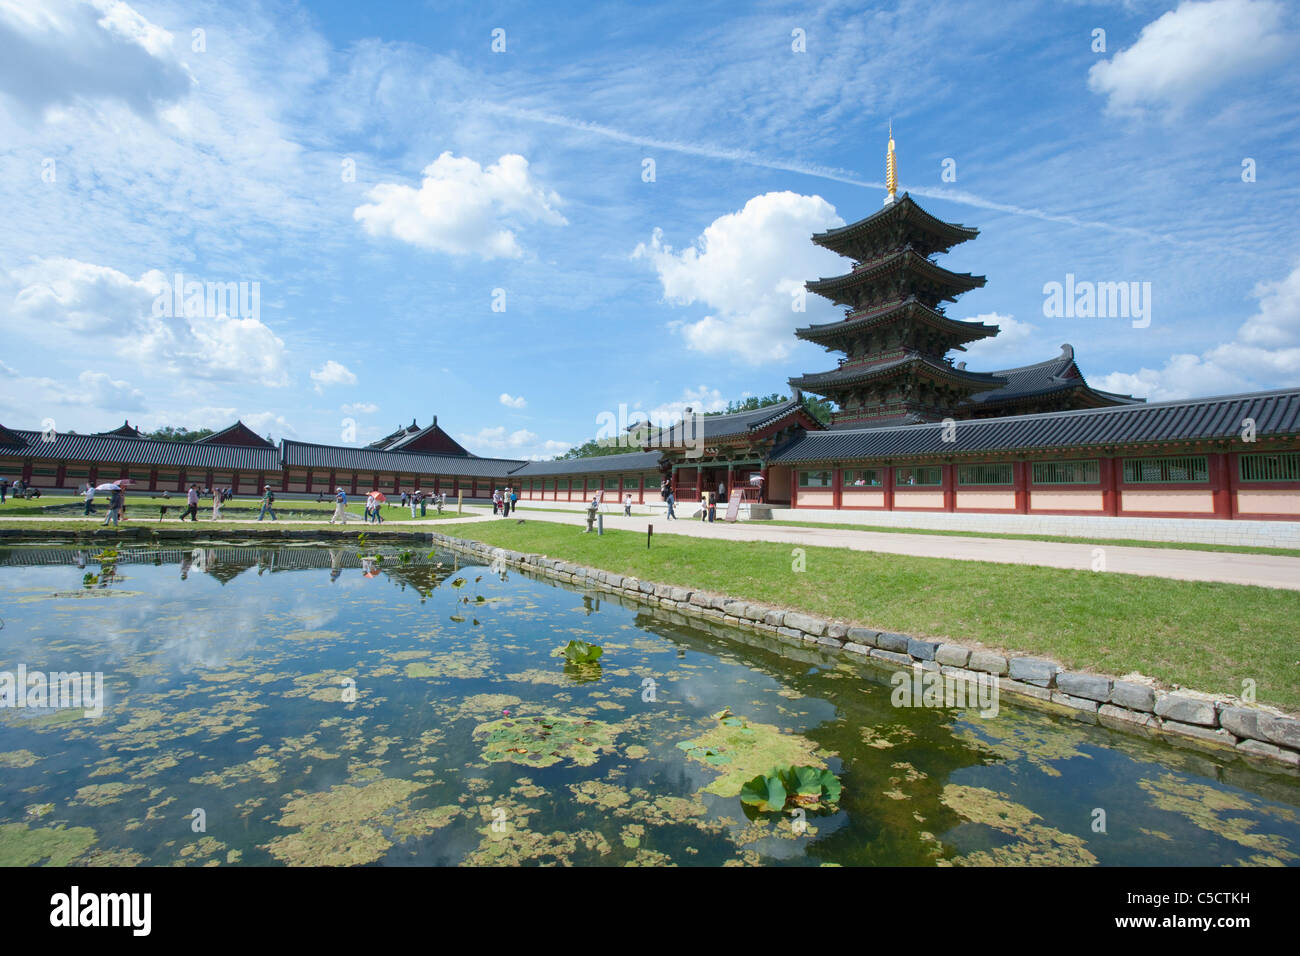 scape of Korean traditional palace Stock Photo